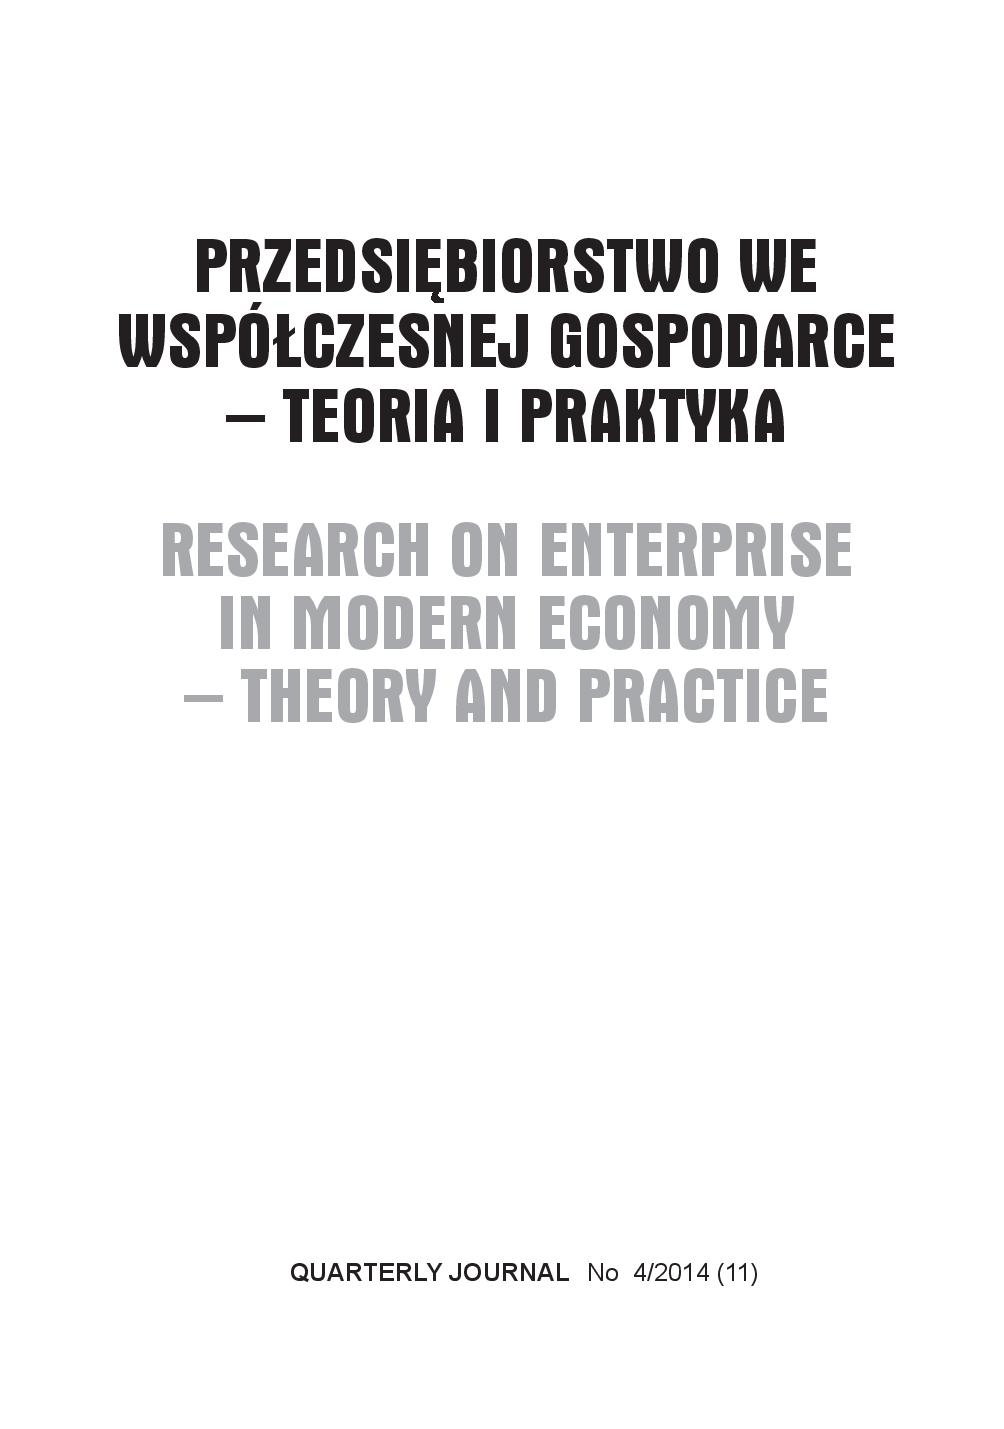 LEASING AS AN ADDITIONAL SOURCE OF FINANCING BUSINESS OPERATIONS OF ENTERPRISES IN POLAND Cover Image